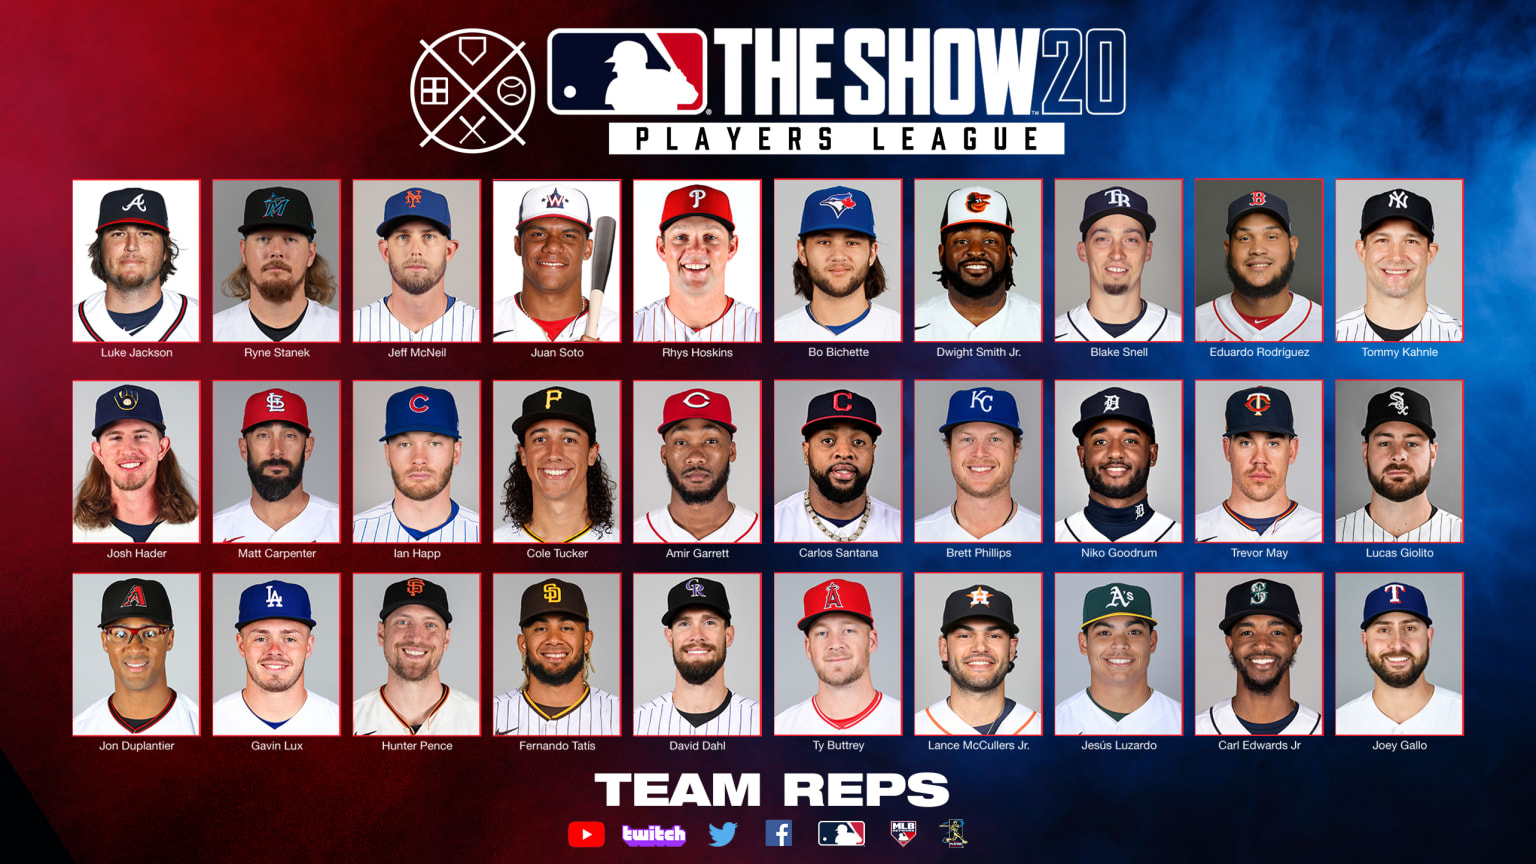 Players league. MLB 20 – ps4. Чемпионы MLB по годам все. Players show 2. How to face scan in MLB the show 23.